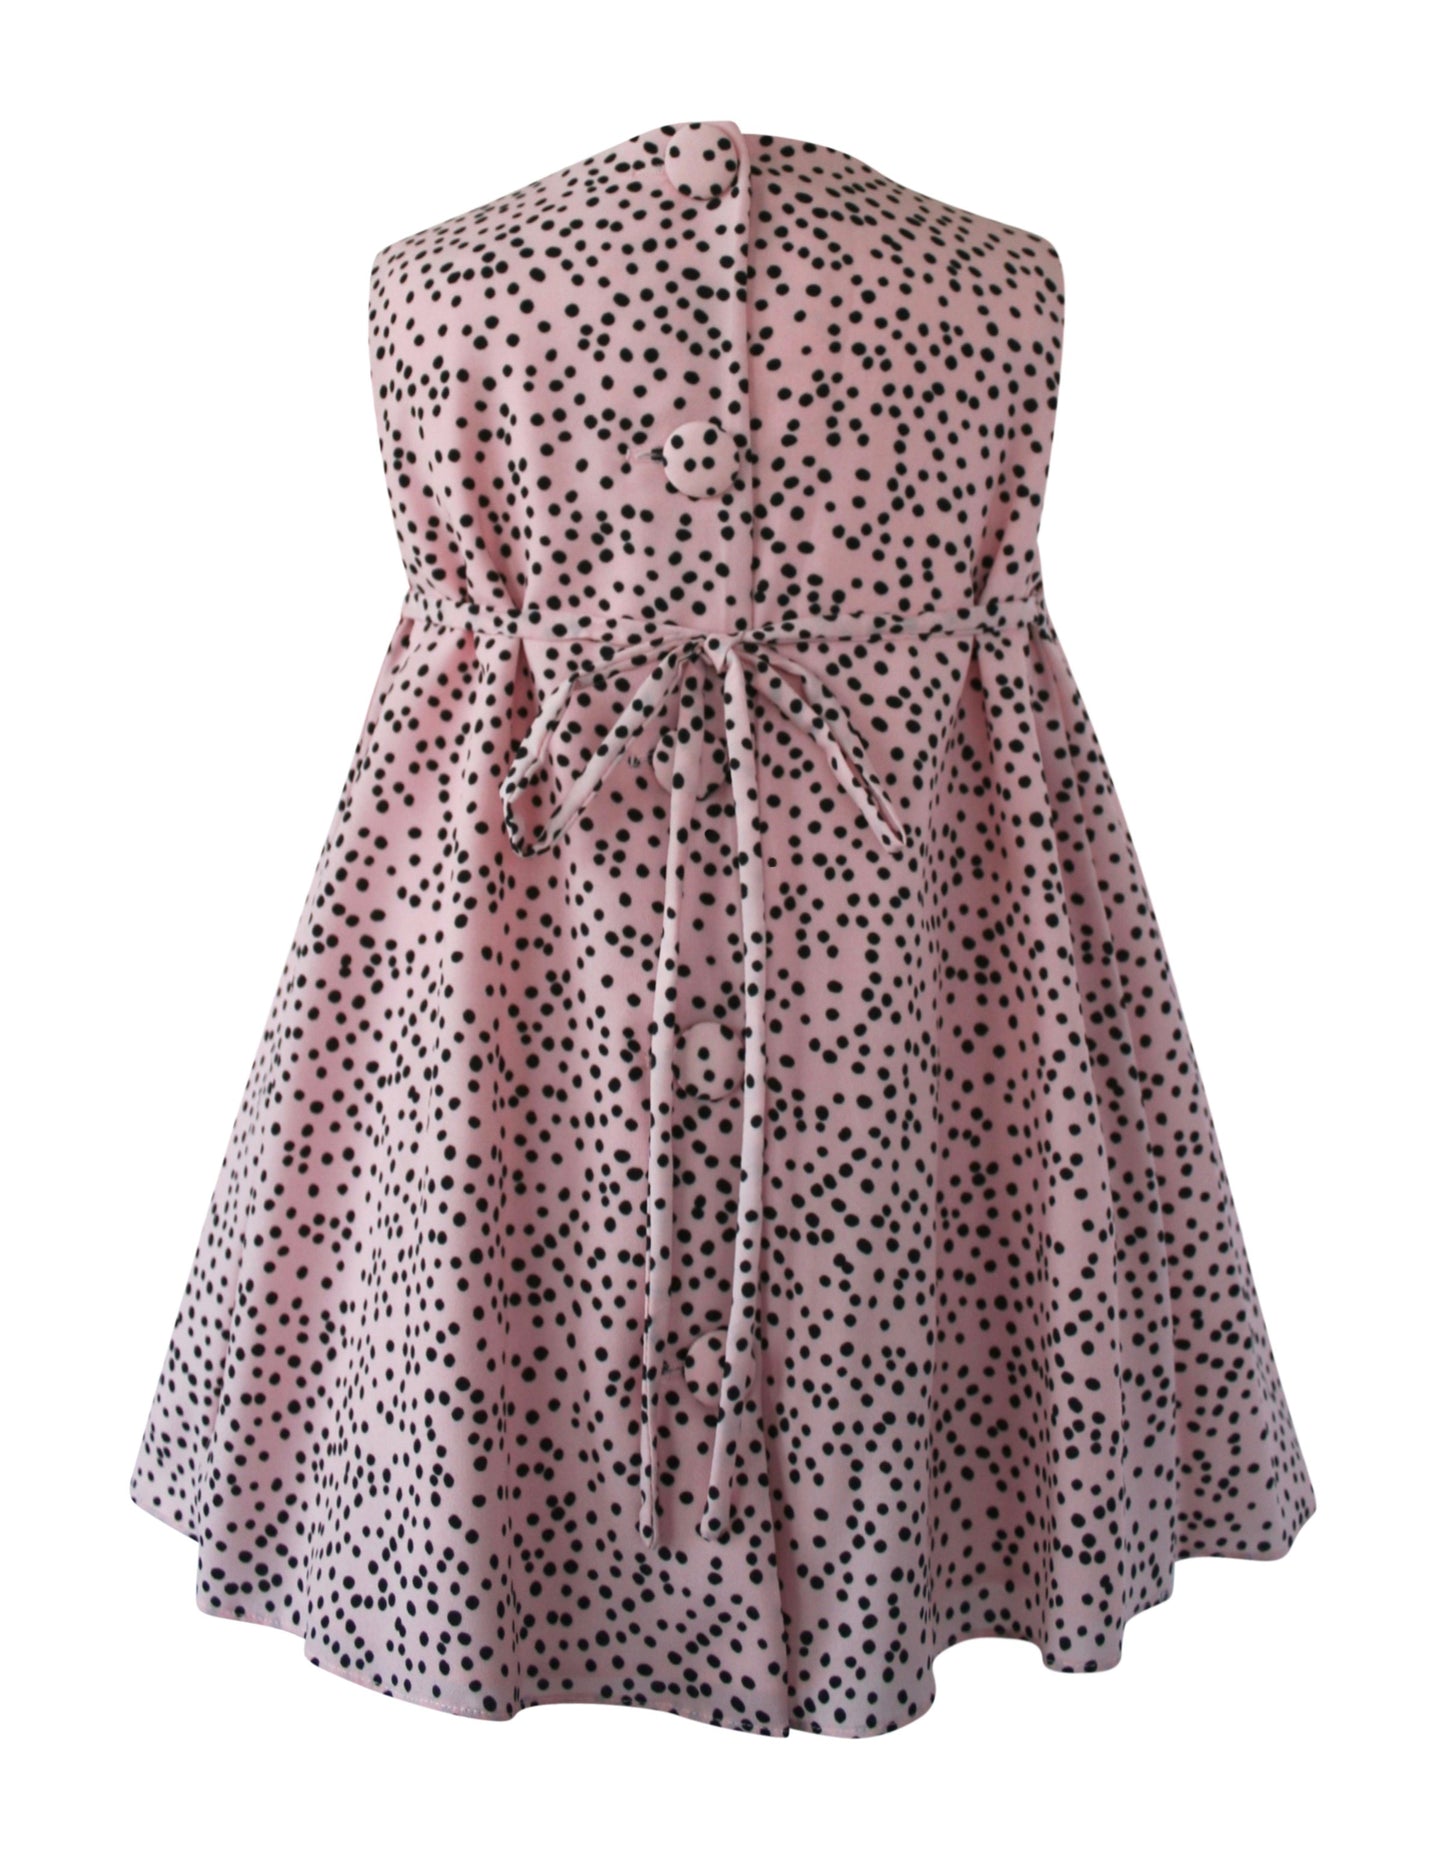 Helena and Harry Girl's Pink with Black Dots Bow Front Dress